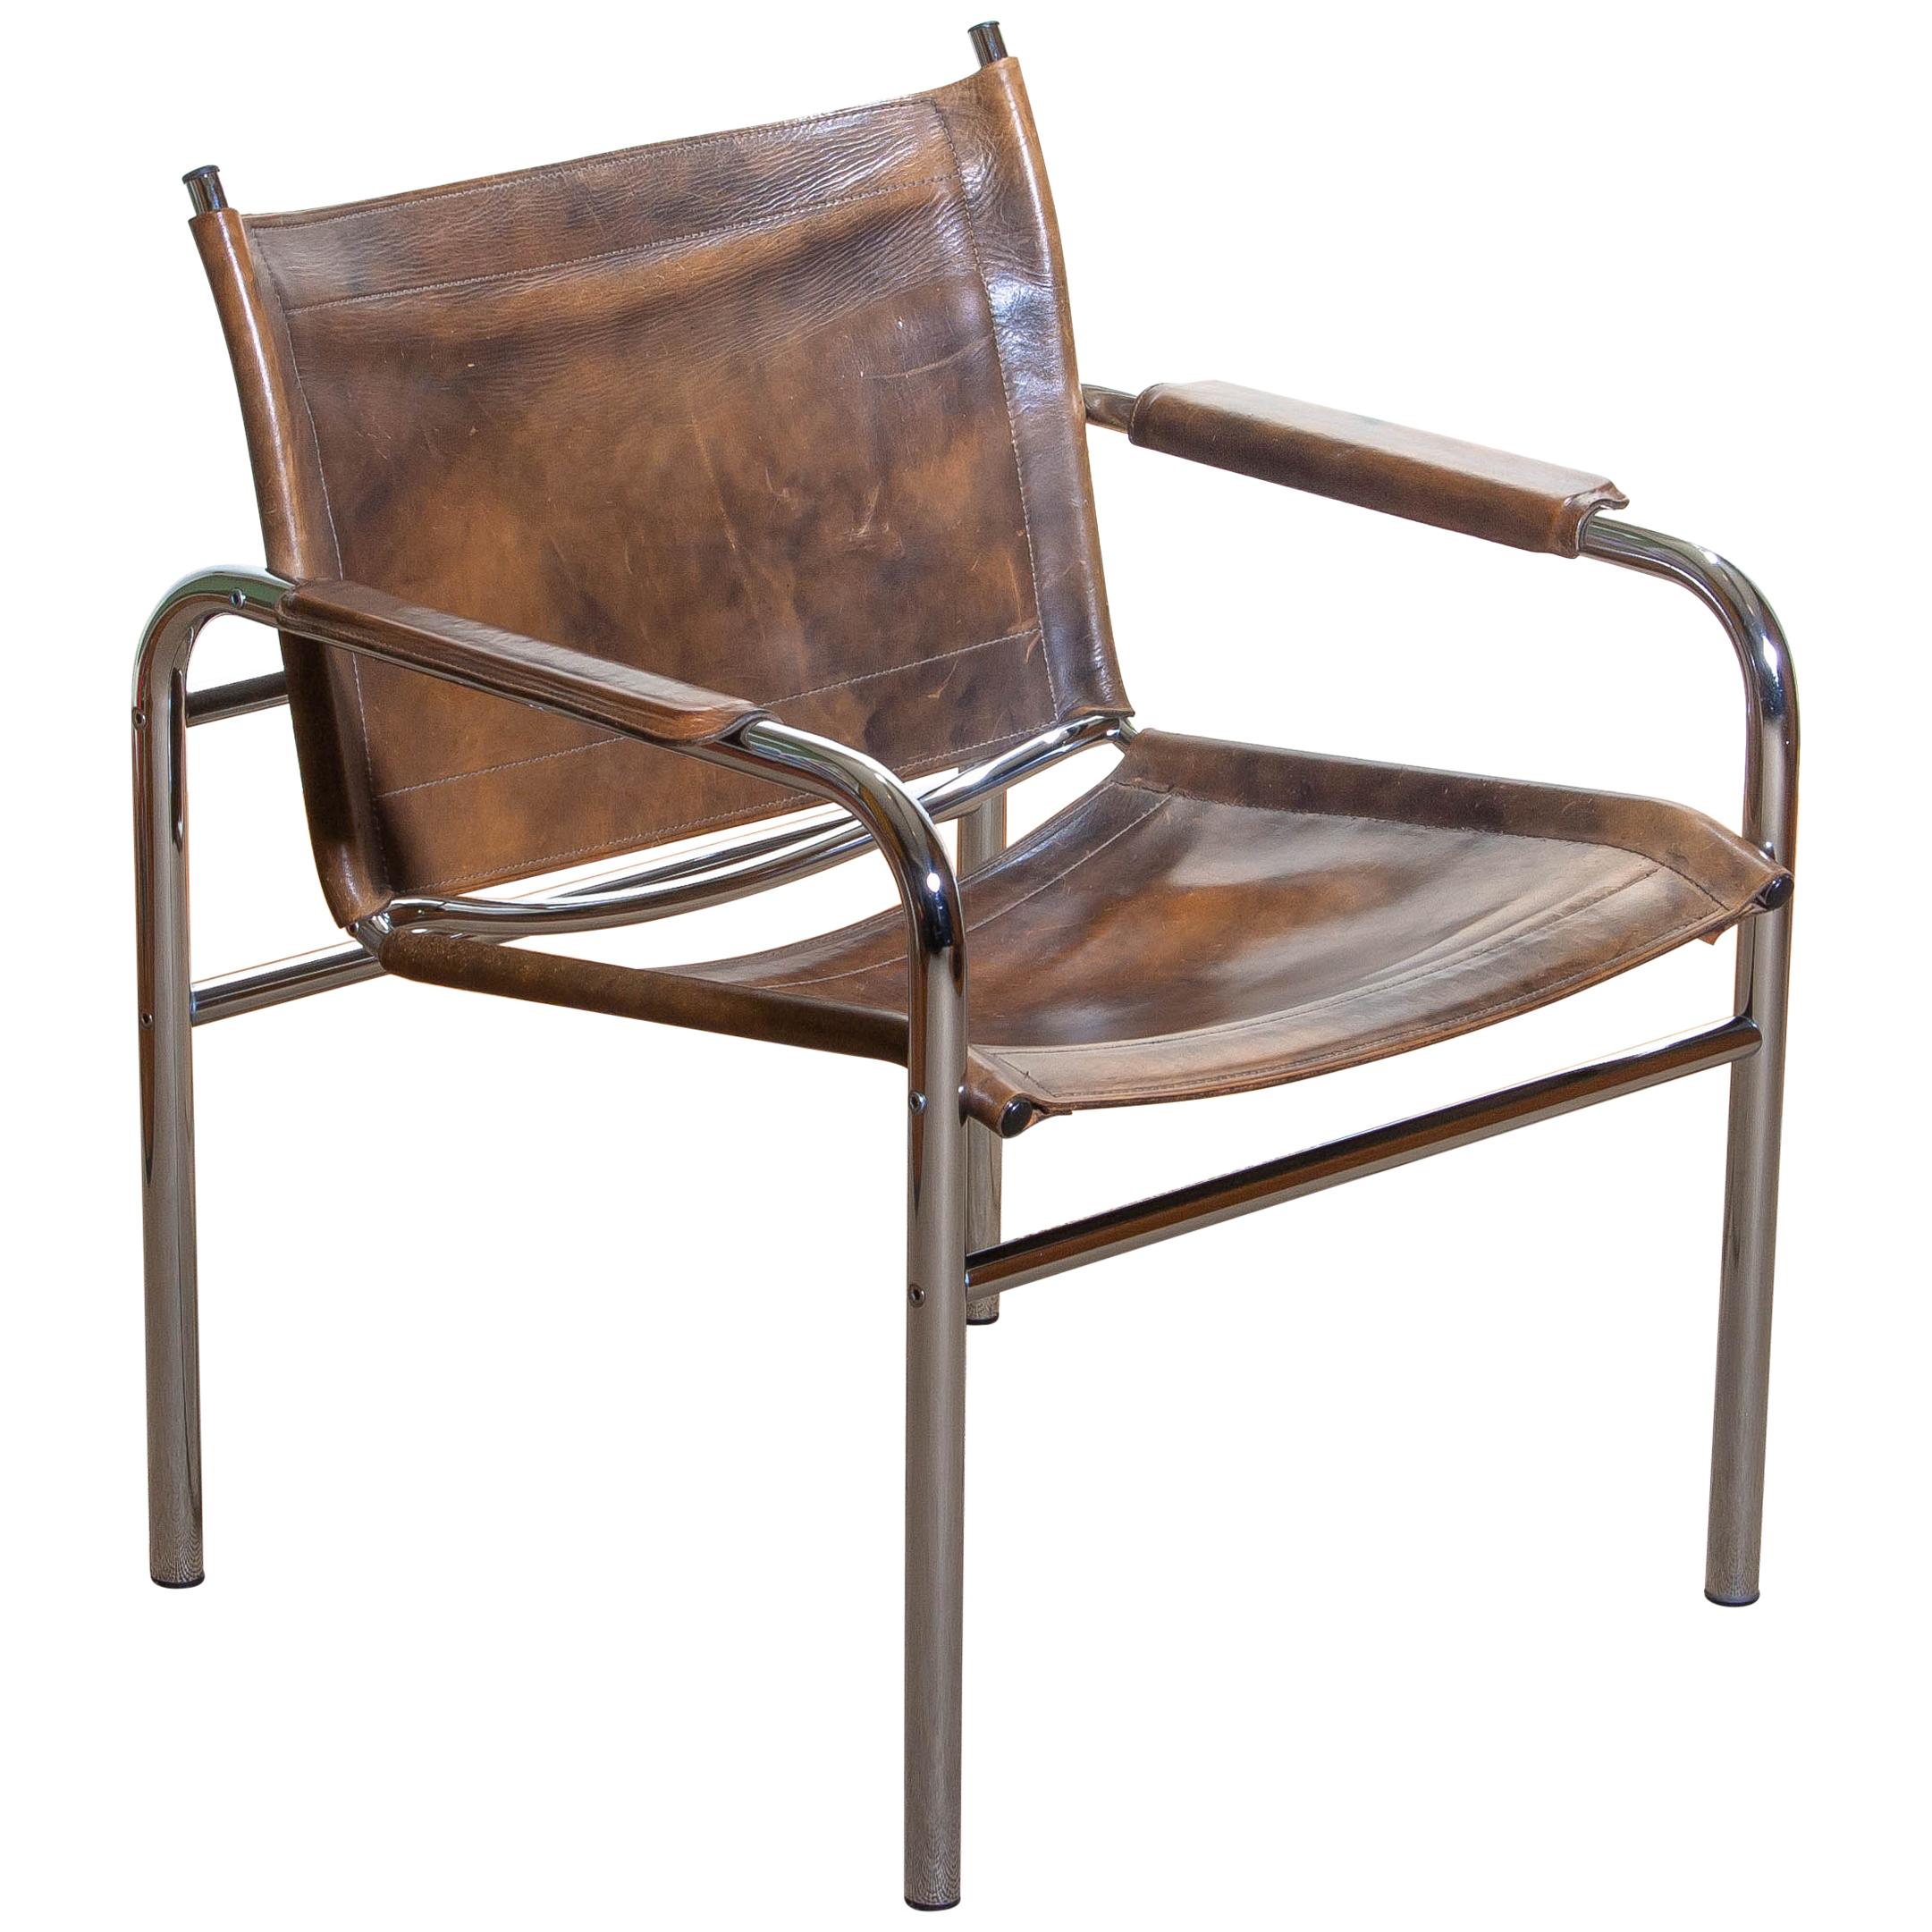 Swedish 1980s Leather and Tubular Steel Armchair by Tord Bjorklund, Sweden